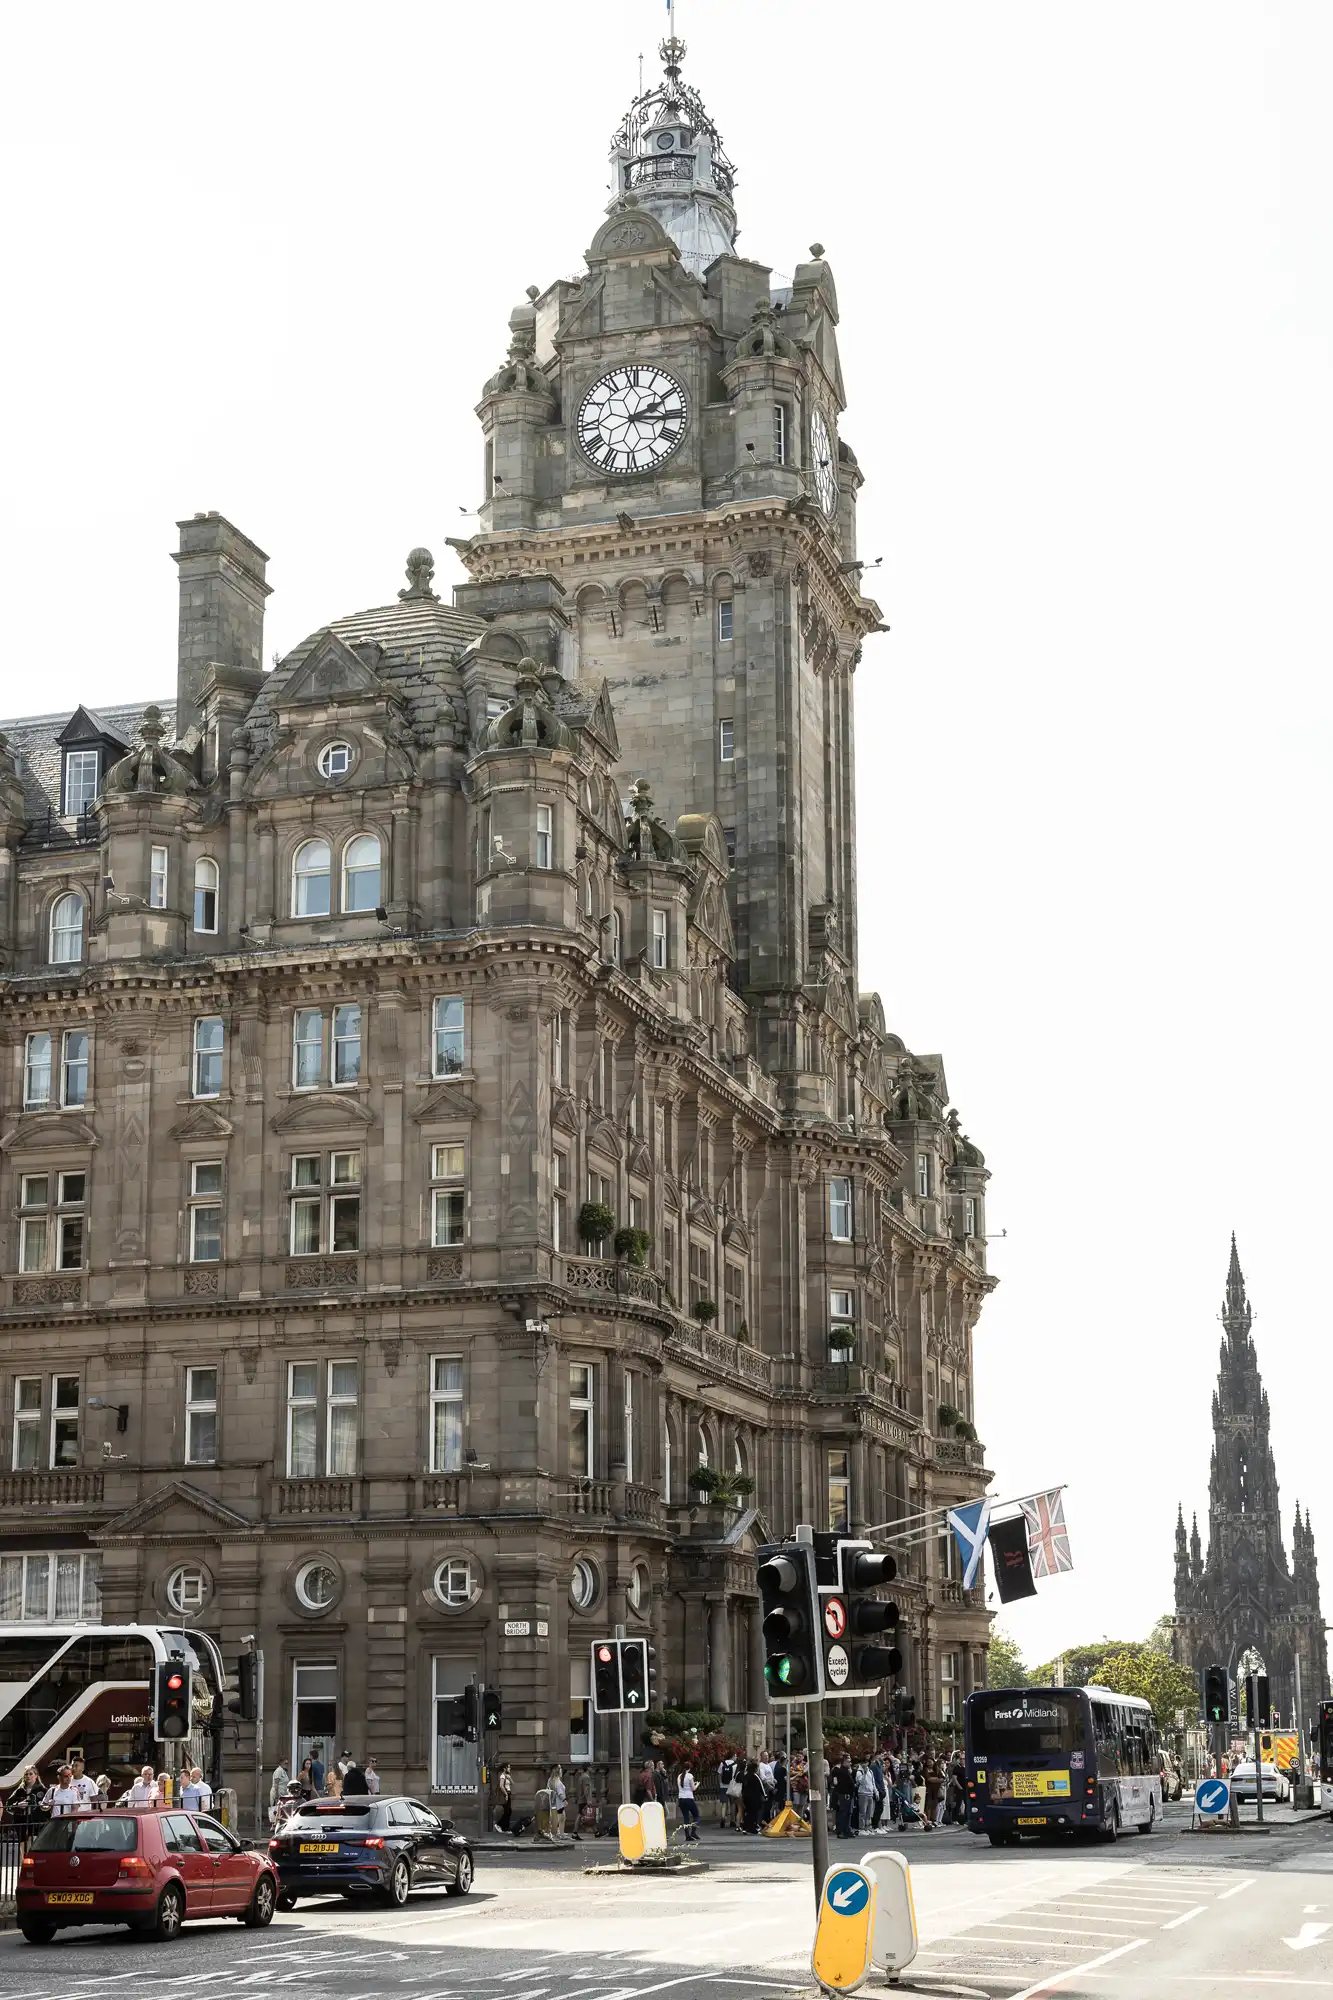 A bustling street scene at the base of the balmoral hotel in edinburgh, featuring the hotel's grand clock tower, vehicles, and pedestrians.